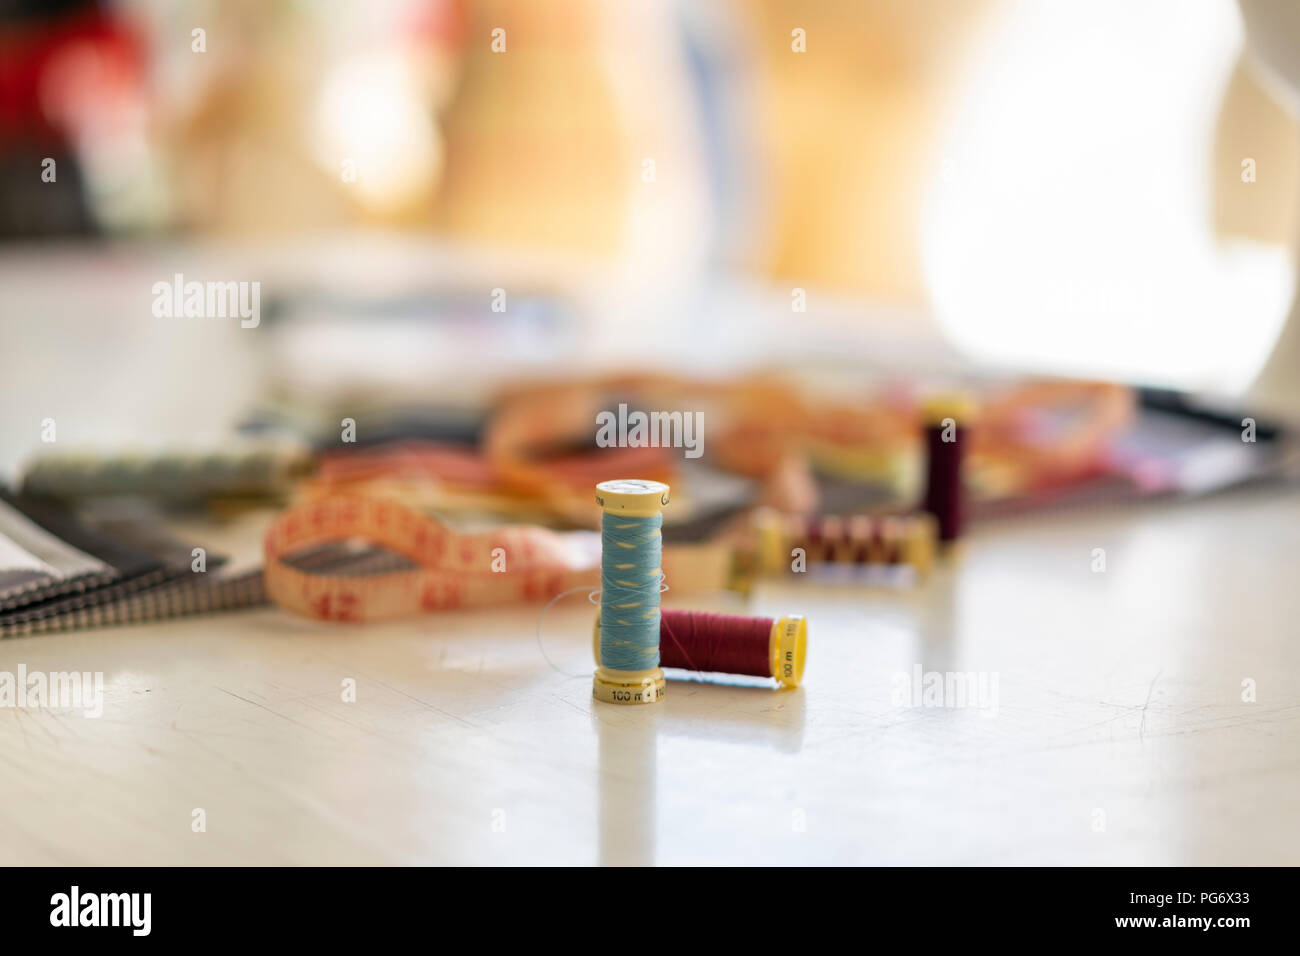 Sewing items on working table in a fashion designer's studio Stock Photo